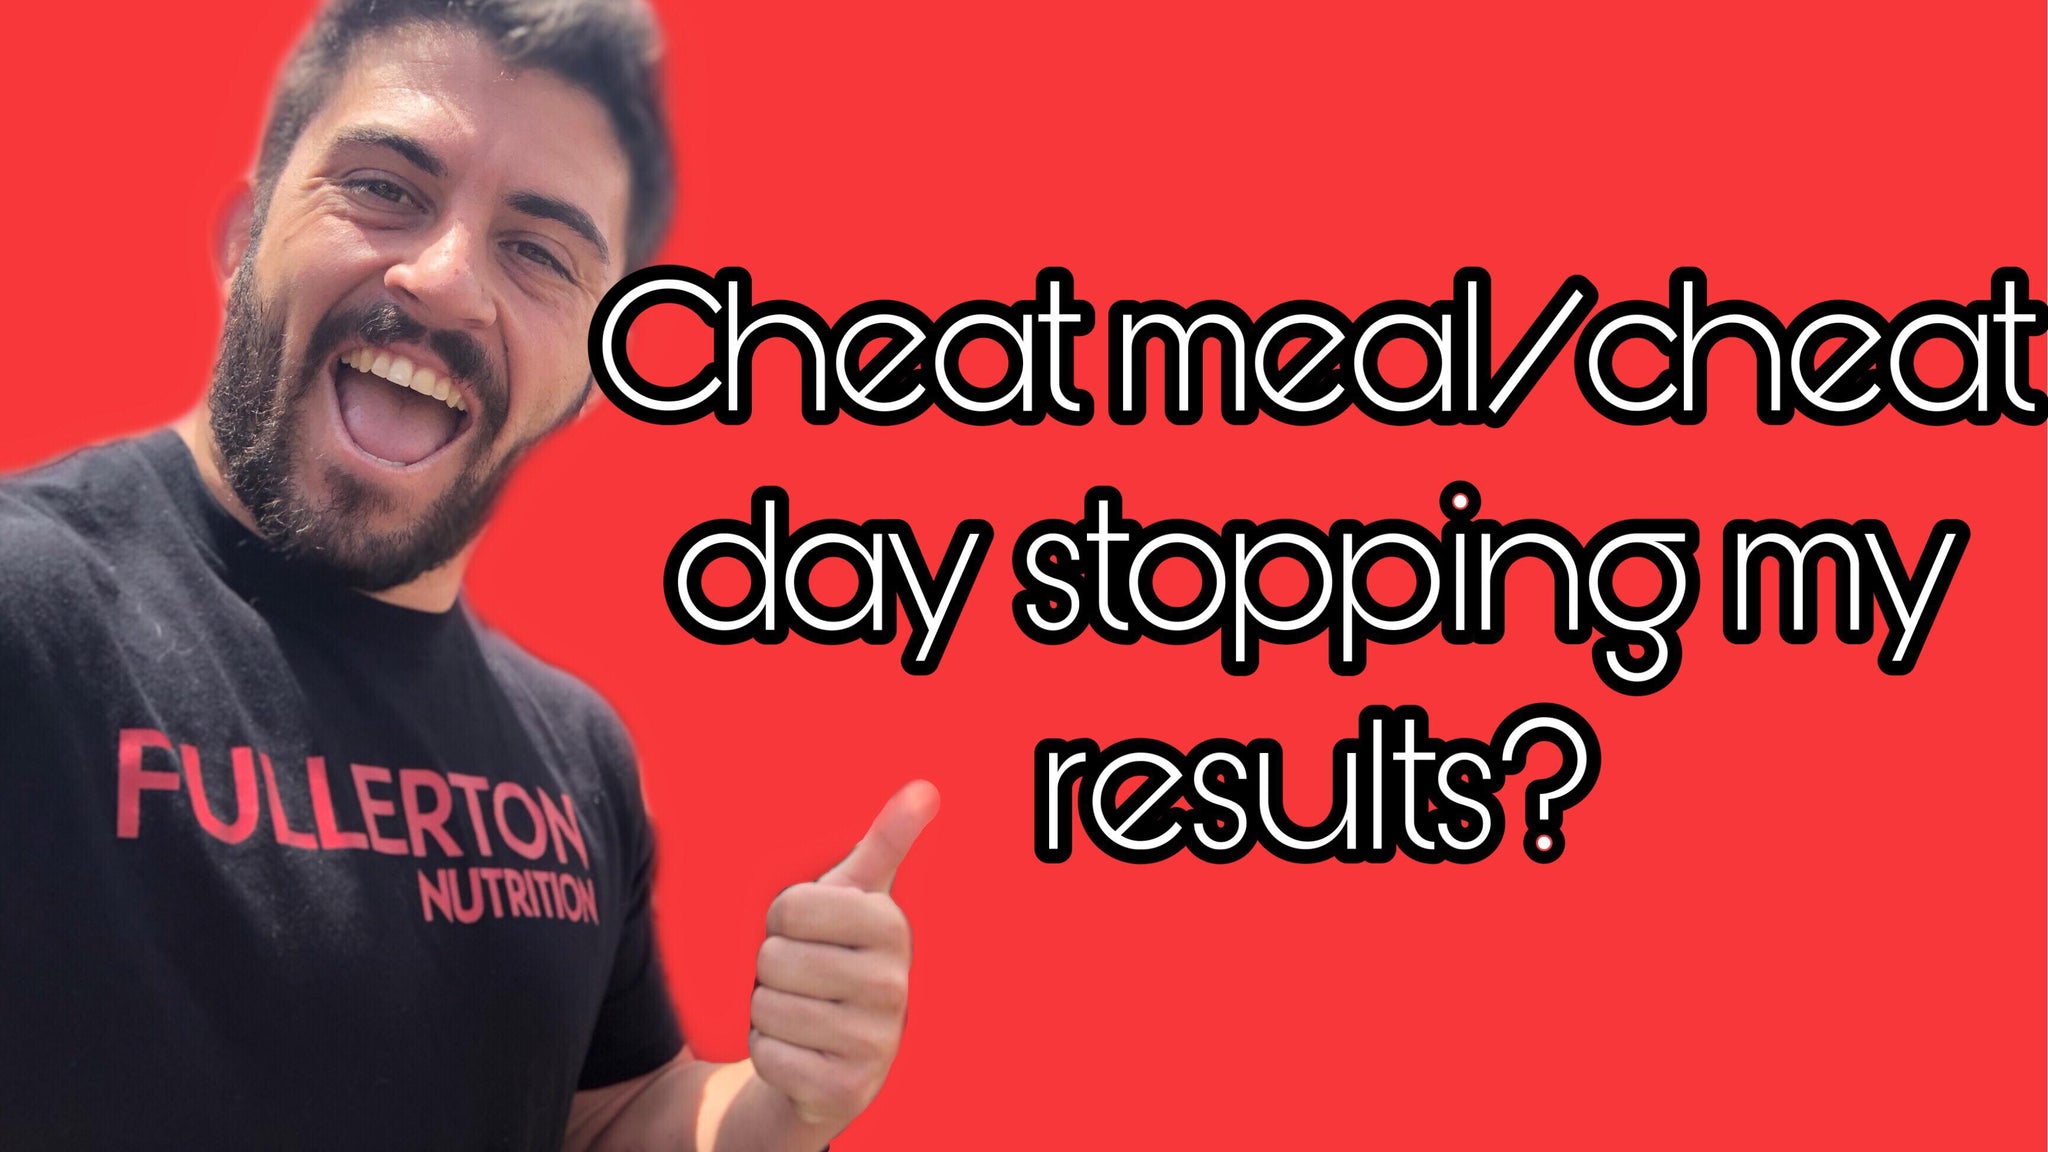 Is a cheat meal/day stopping my results